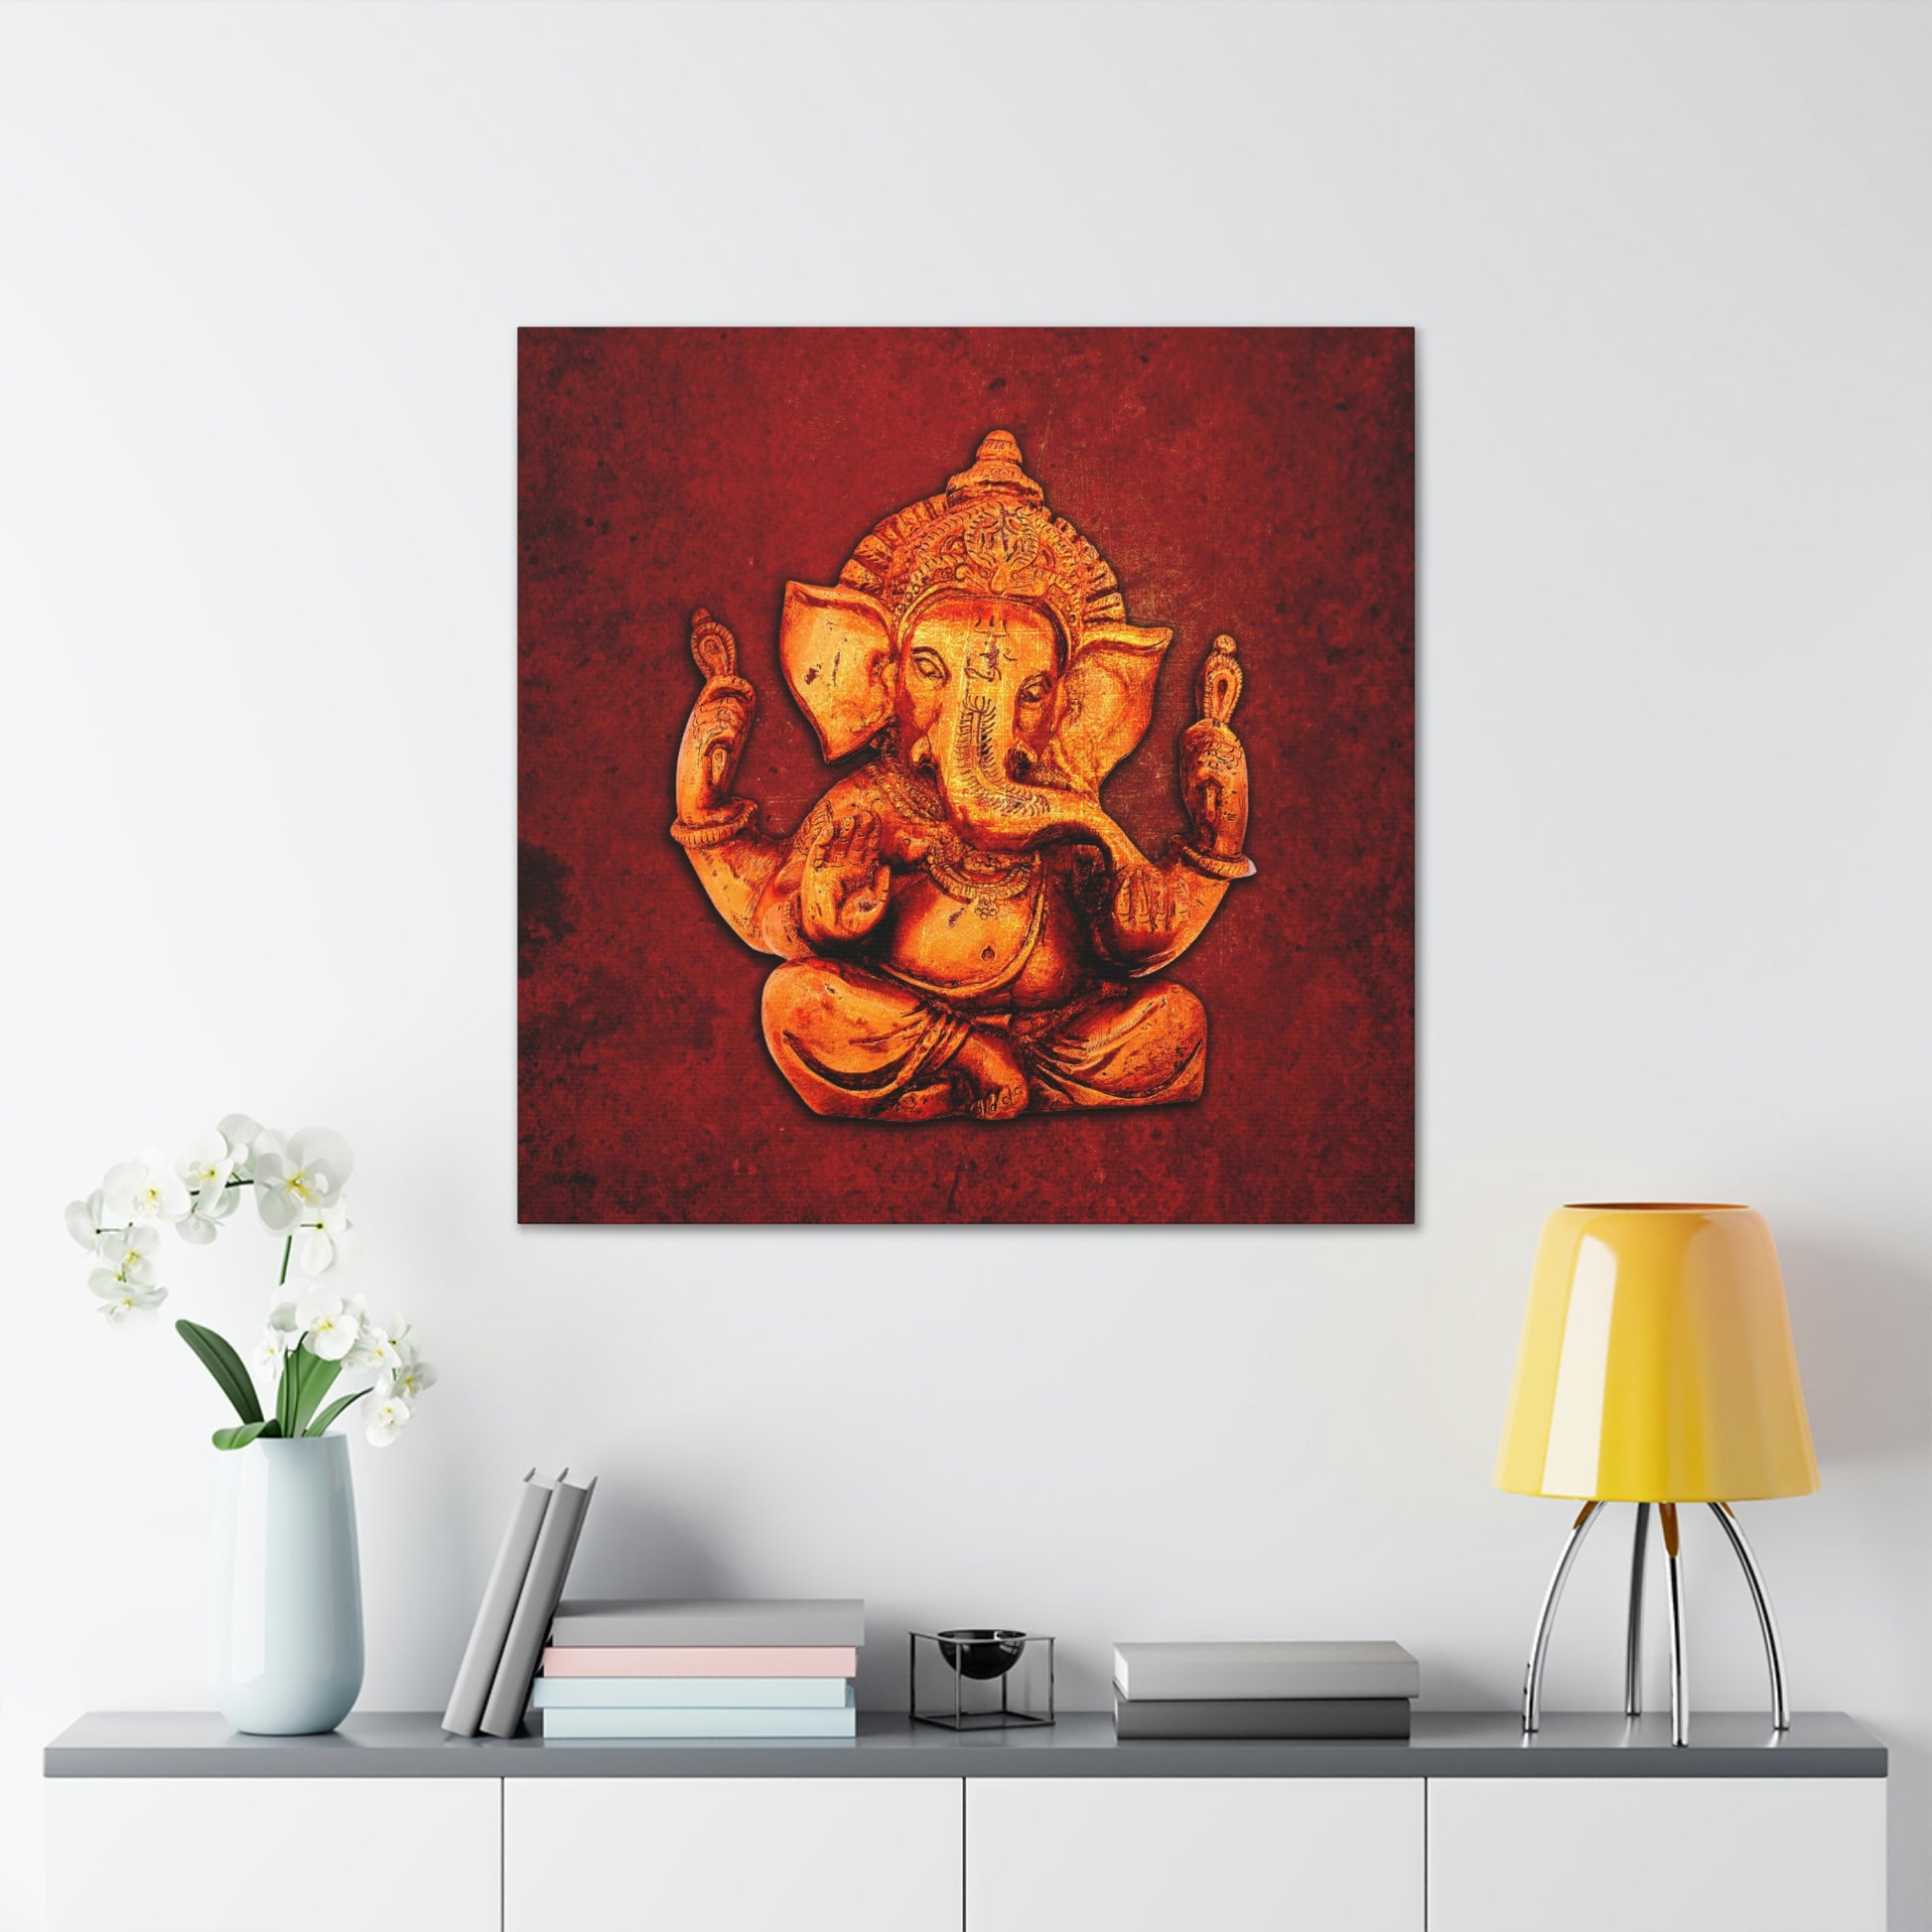 Ganesha on a Distressed Lava Red Background Print on Unframed Stretched Canvas hung on wall